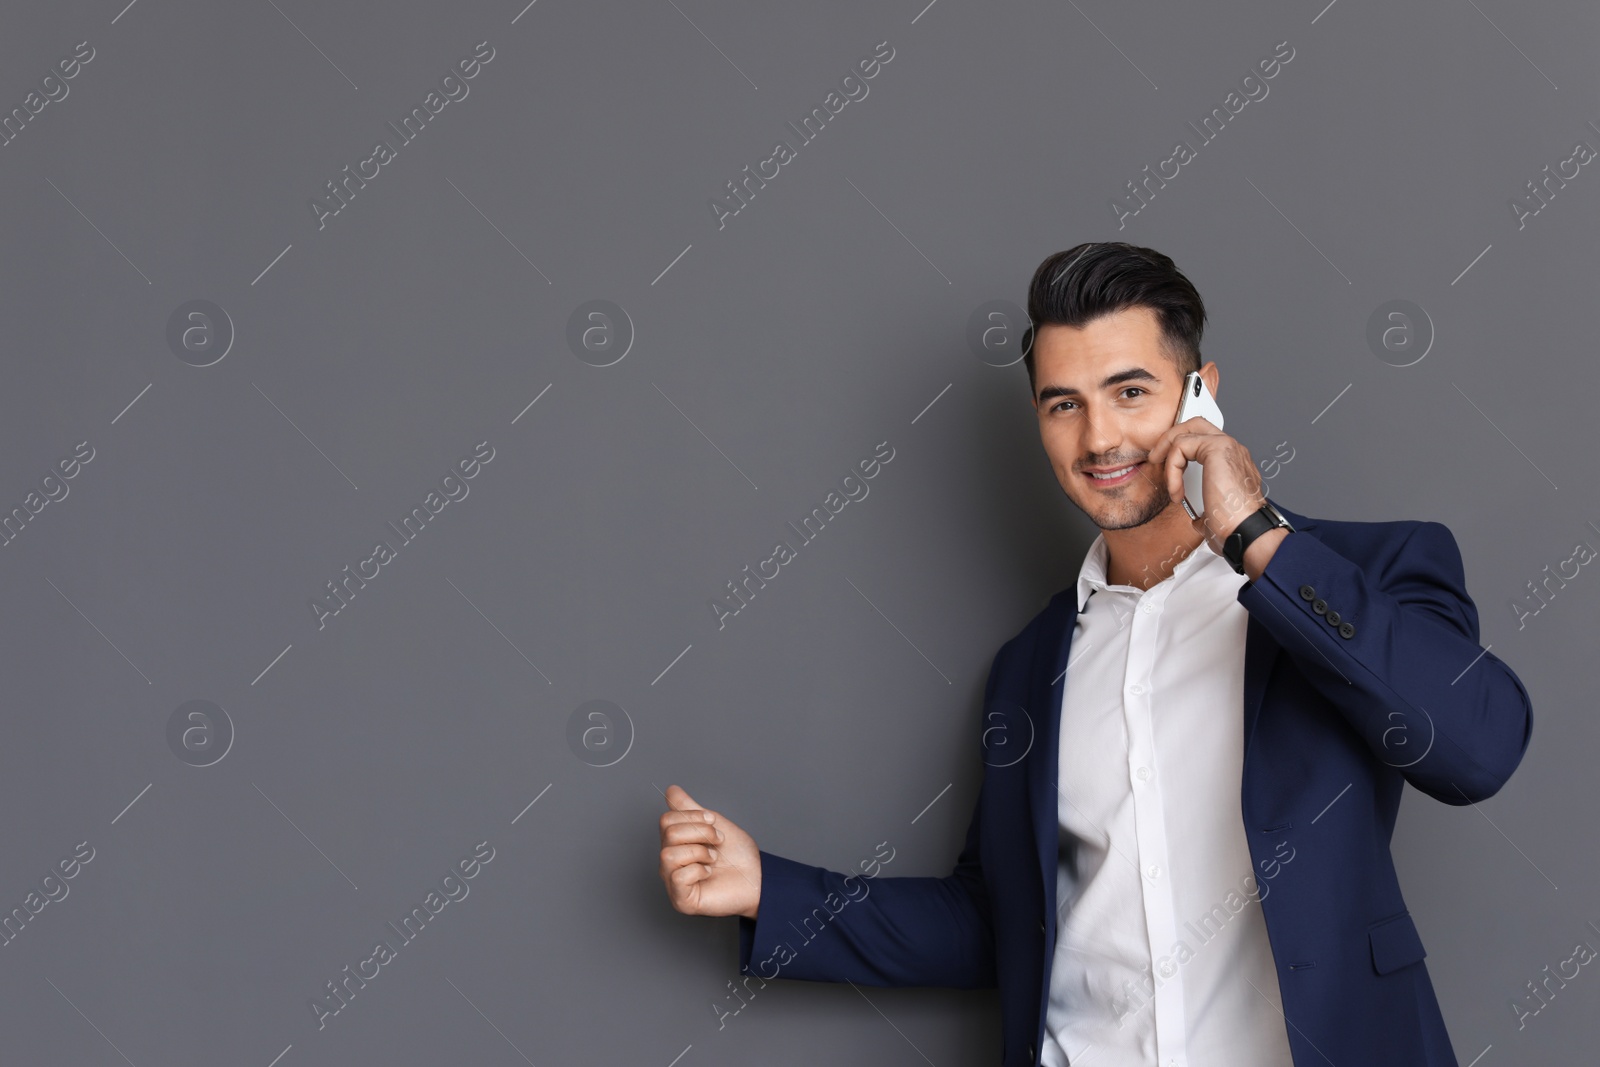 Photo of Handsome young man talking on phone against grey background. Space for text